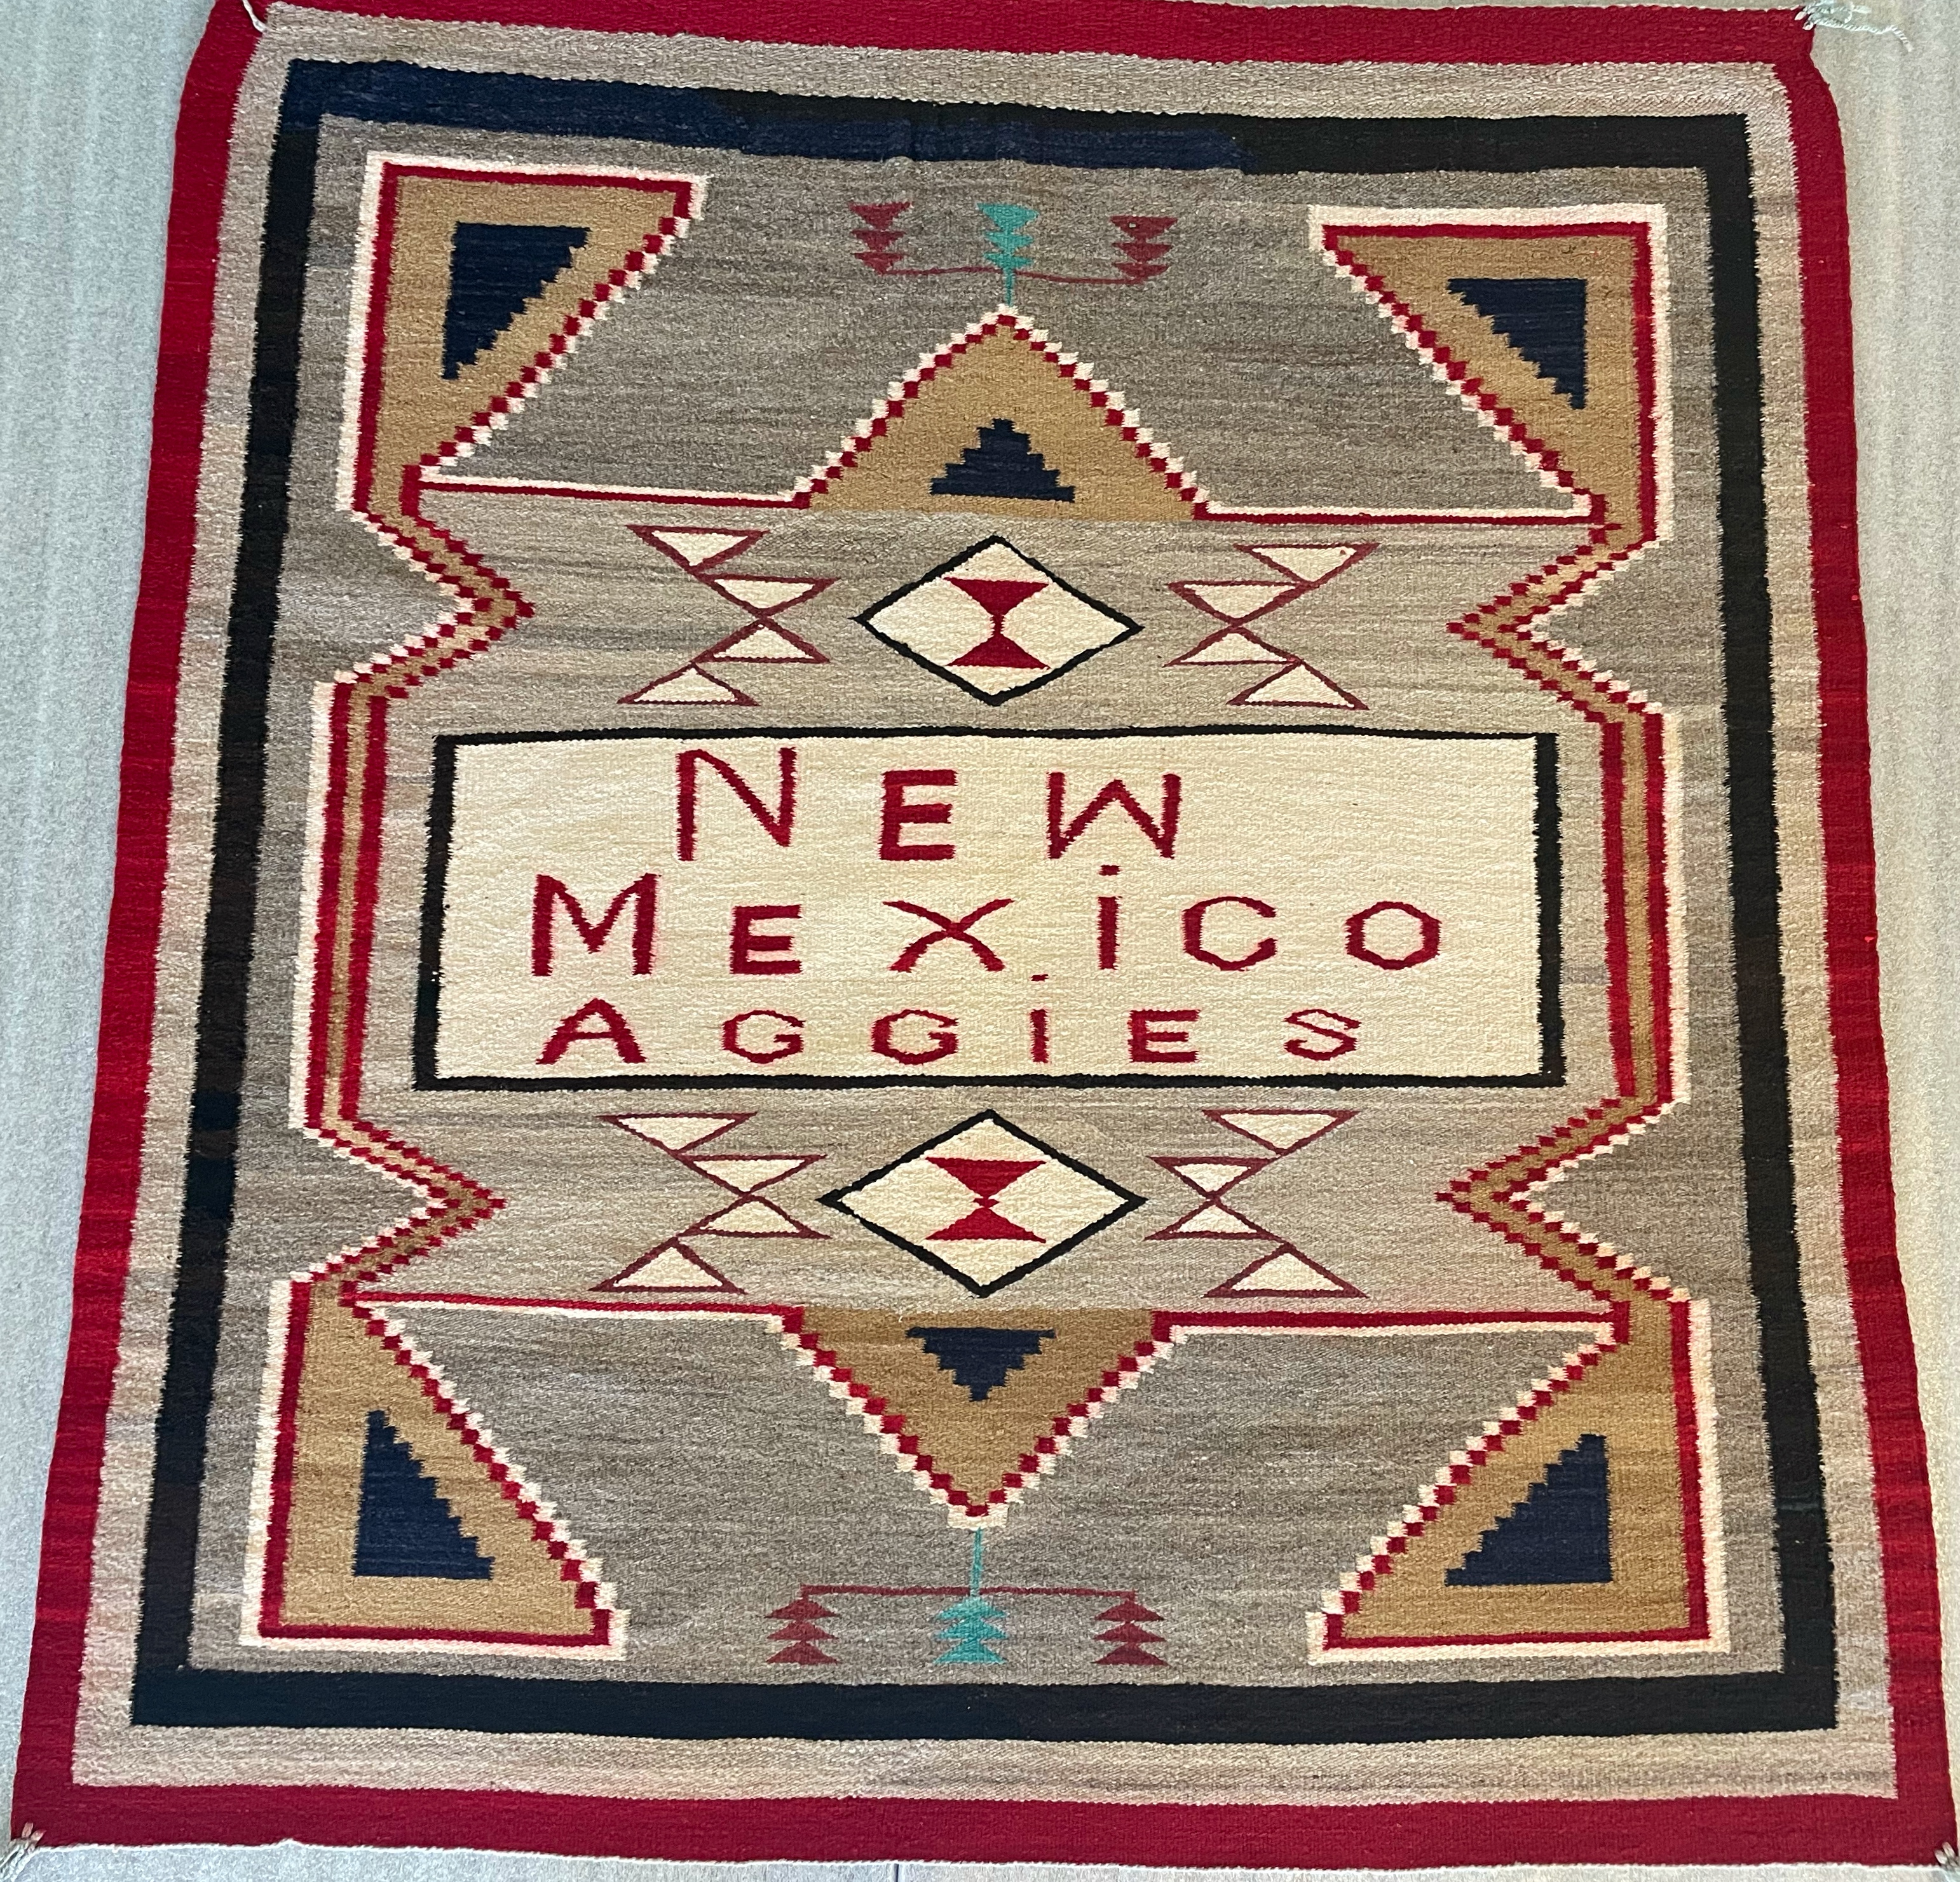 Brown woven rug featuring white, tan, black, and red geometric designs and New Mexico Aggies at the center.